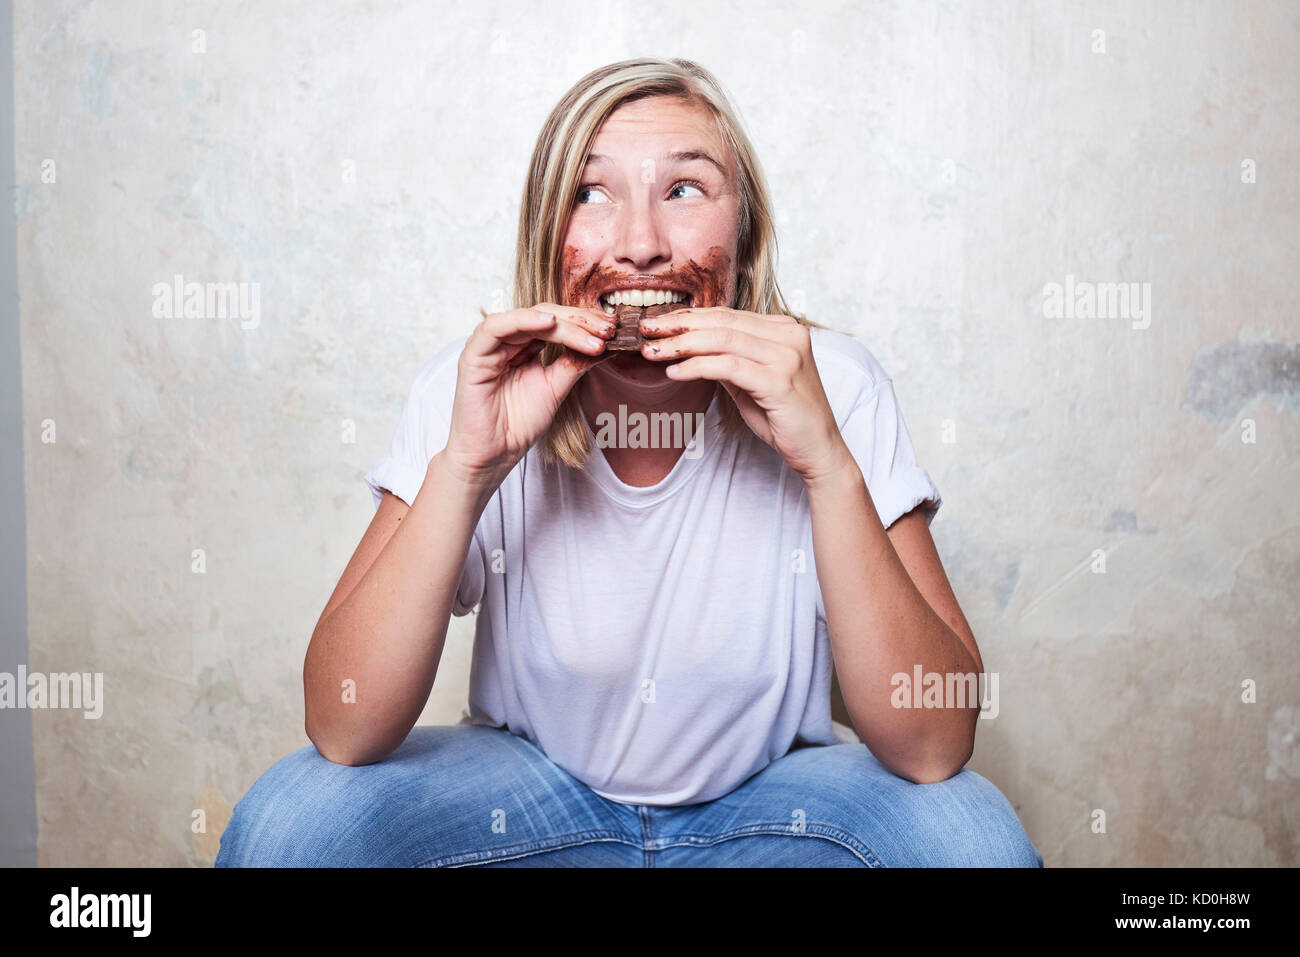 Portrait of woman eating bar of chocolate, chocolate around mouth Stock Photo